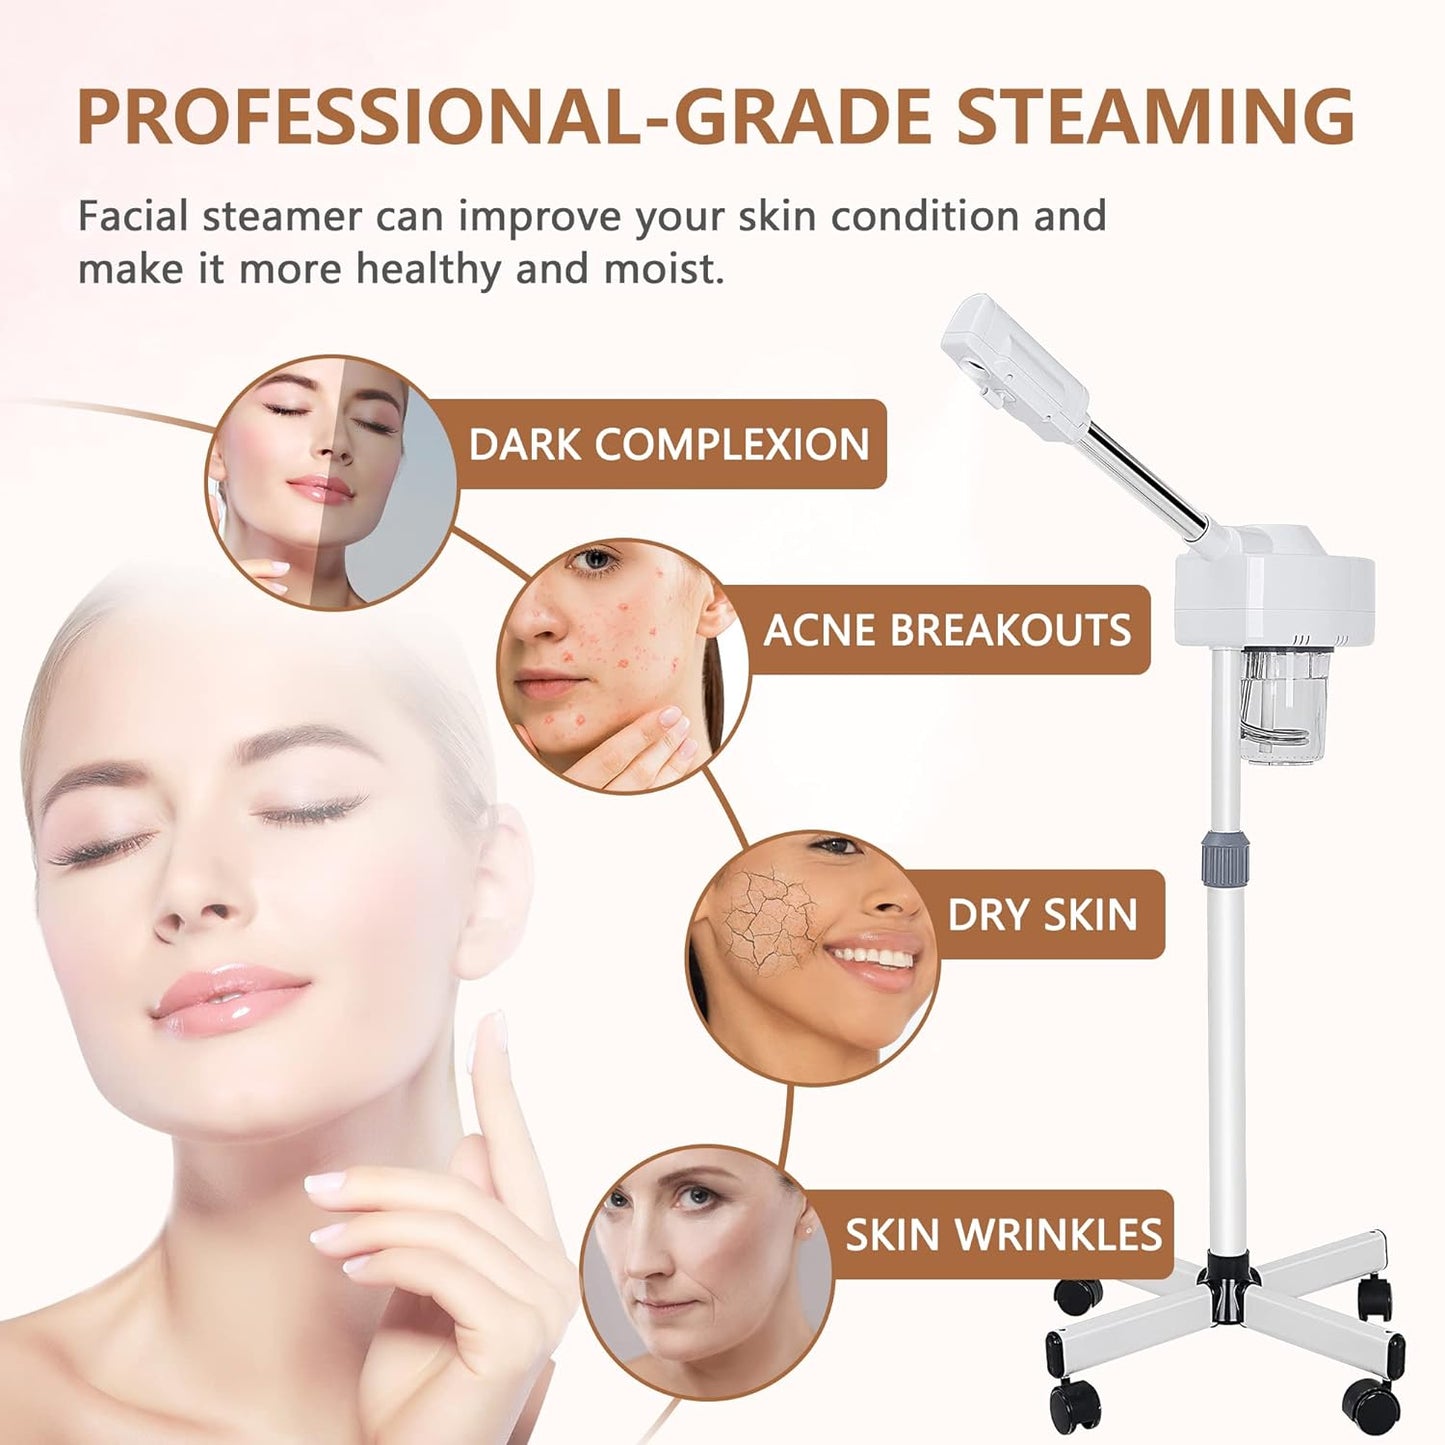 Nova Microdermabrasion Professional Facial Steamer On Wheels Ionic Ozone Facial Steamer with Hot Mist Function Stand Facial Steamer for Personal Home Salon Spa Skin Cleaning